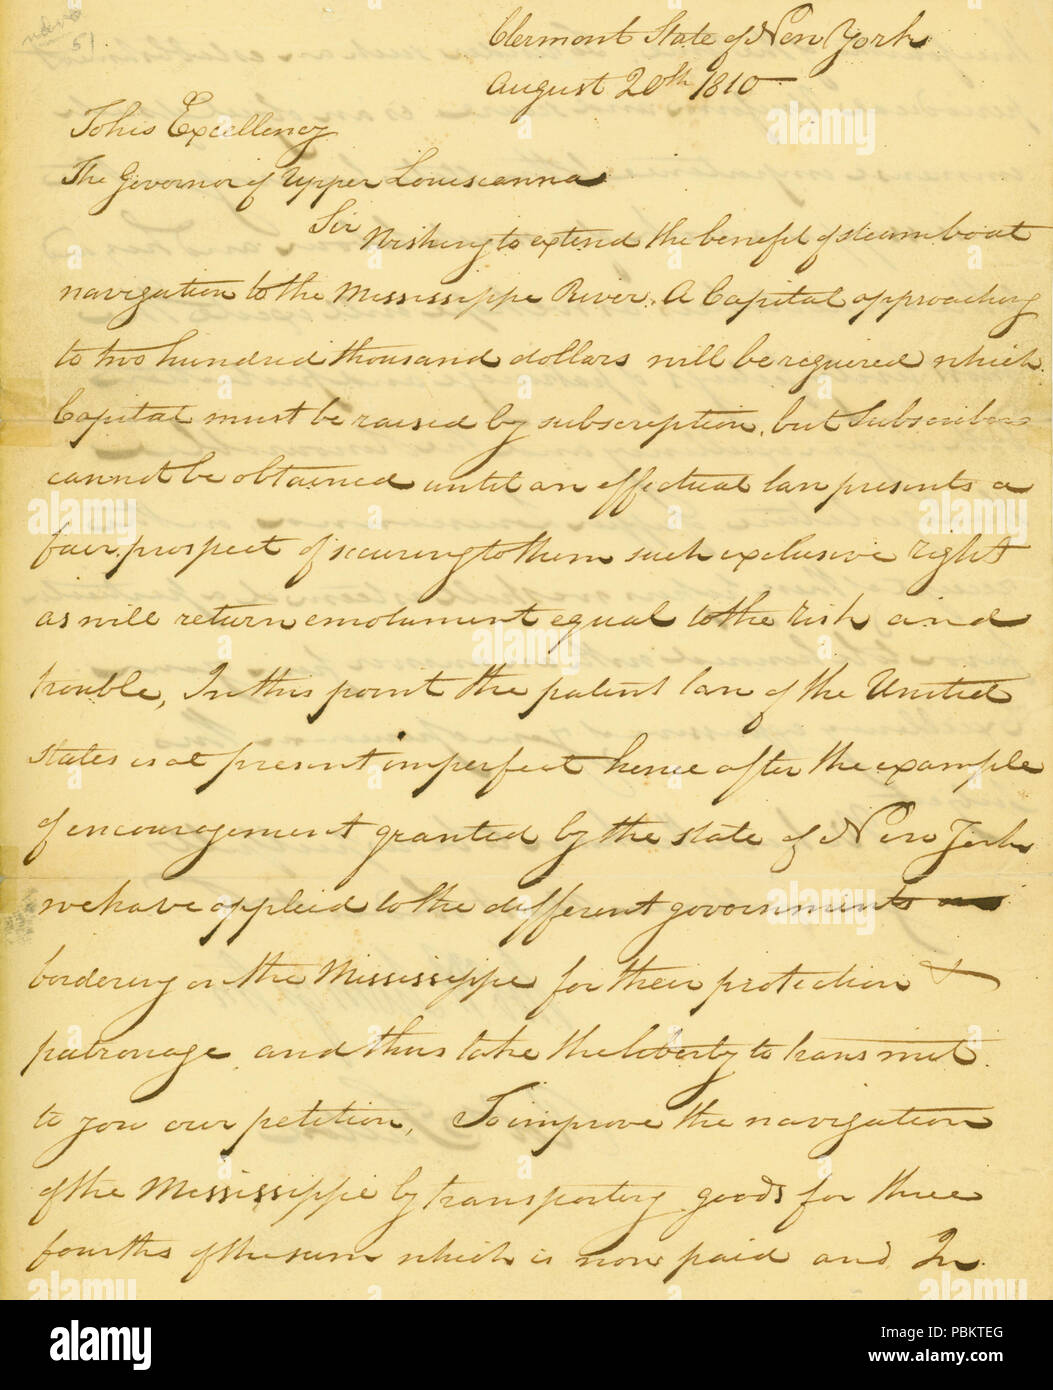 905 Letter signed by Robert R. Livingston and Robert Fulton, Clermont, New York, to the governor of Upper Louisiana, August 20, 1810 Stock Photo